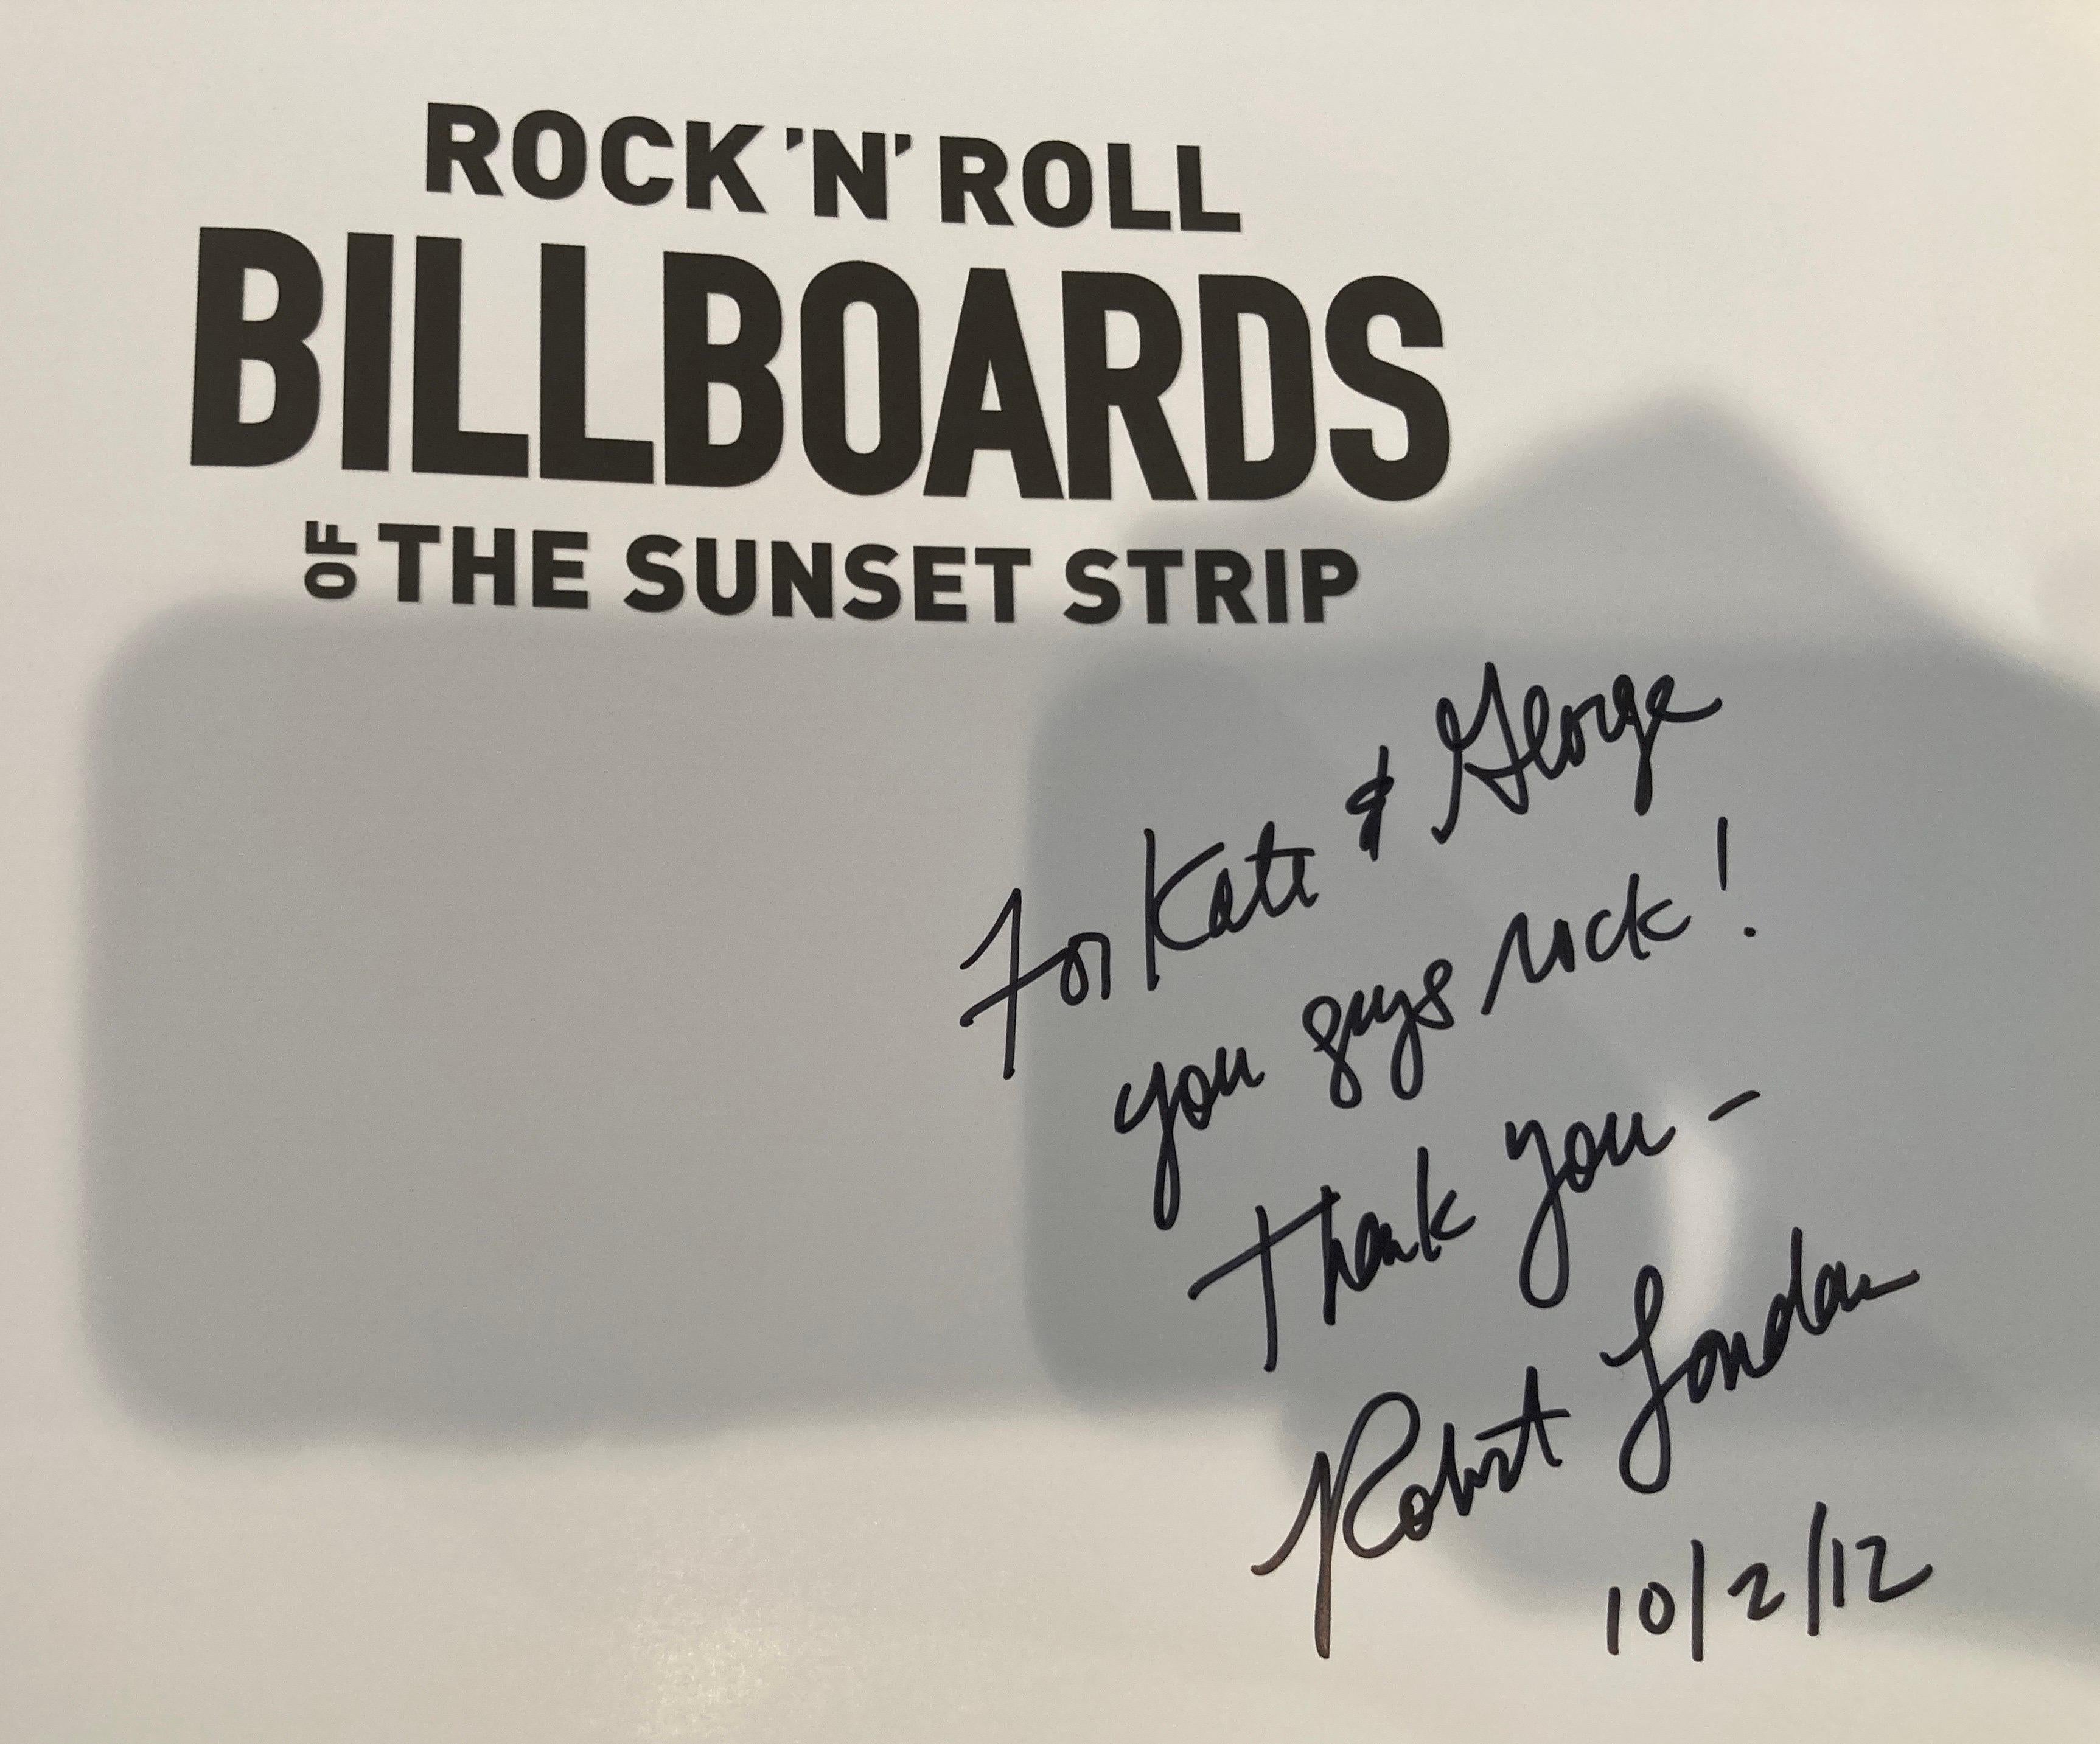 American Rock 'n' Roll Billboards of the Sunset Strip Signed by Robert Landau For Sale